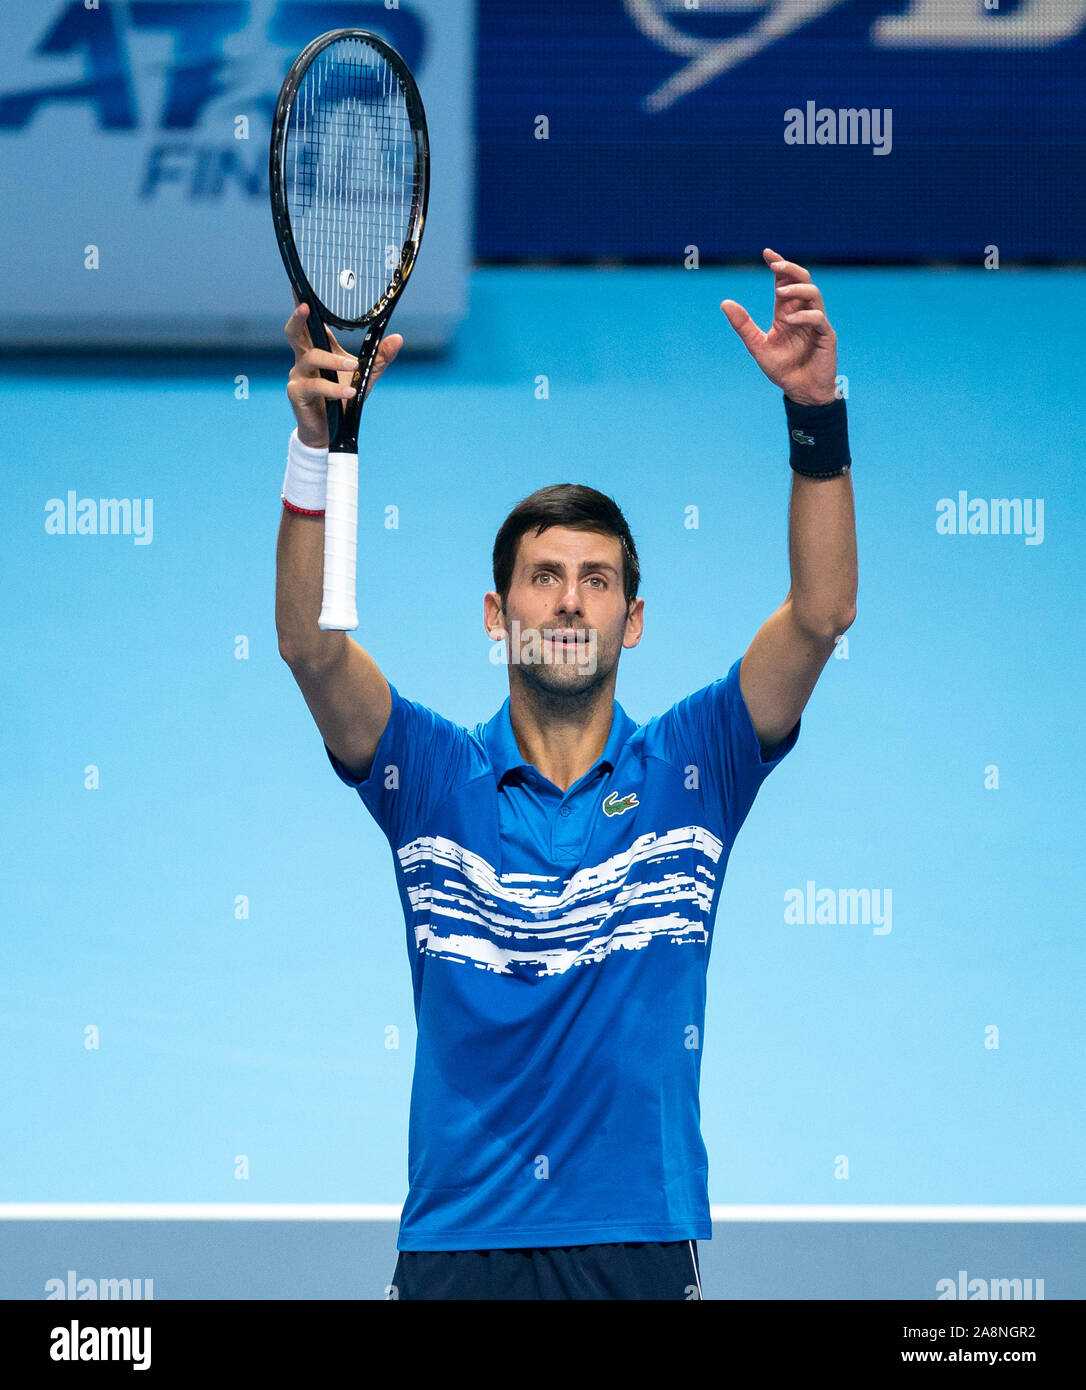 London, UK. 10th Nov, 2019. Novak DJOKOVIC (Serbia) wins his first match  during the Nitto ATP Tennis Finals London at The O2, London, England on 10  November 2019. Photo by Andy Rowland.